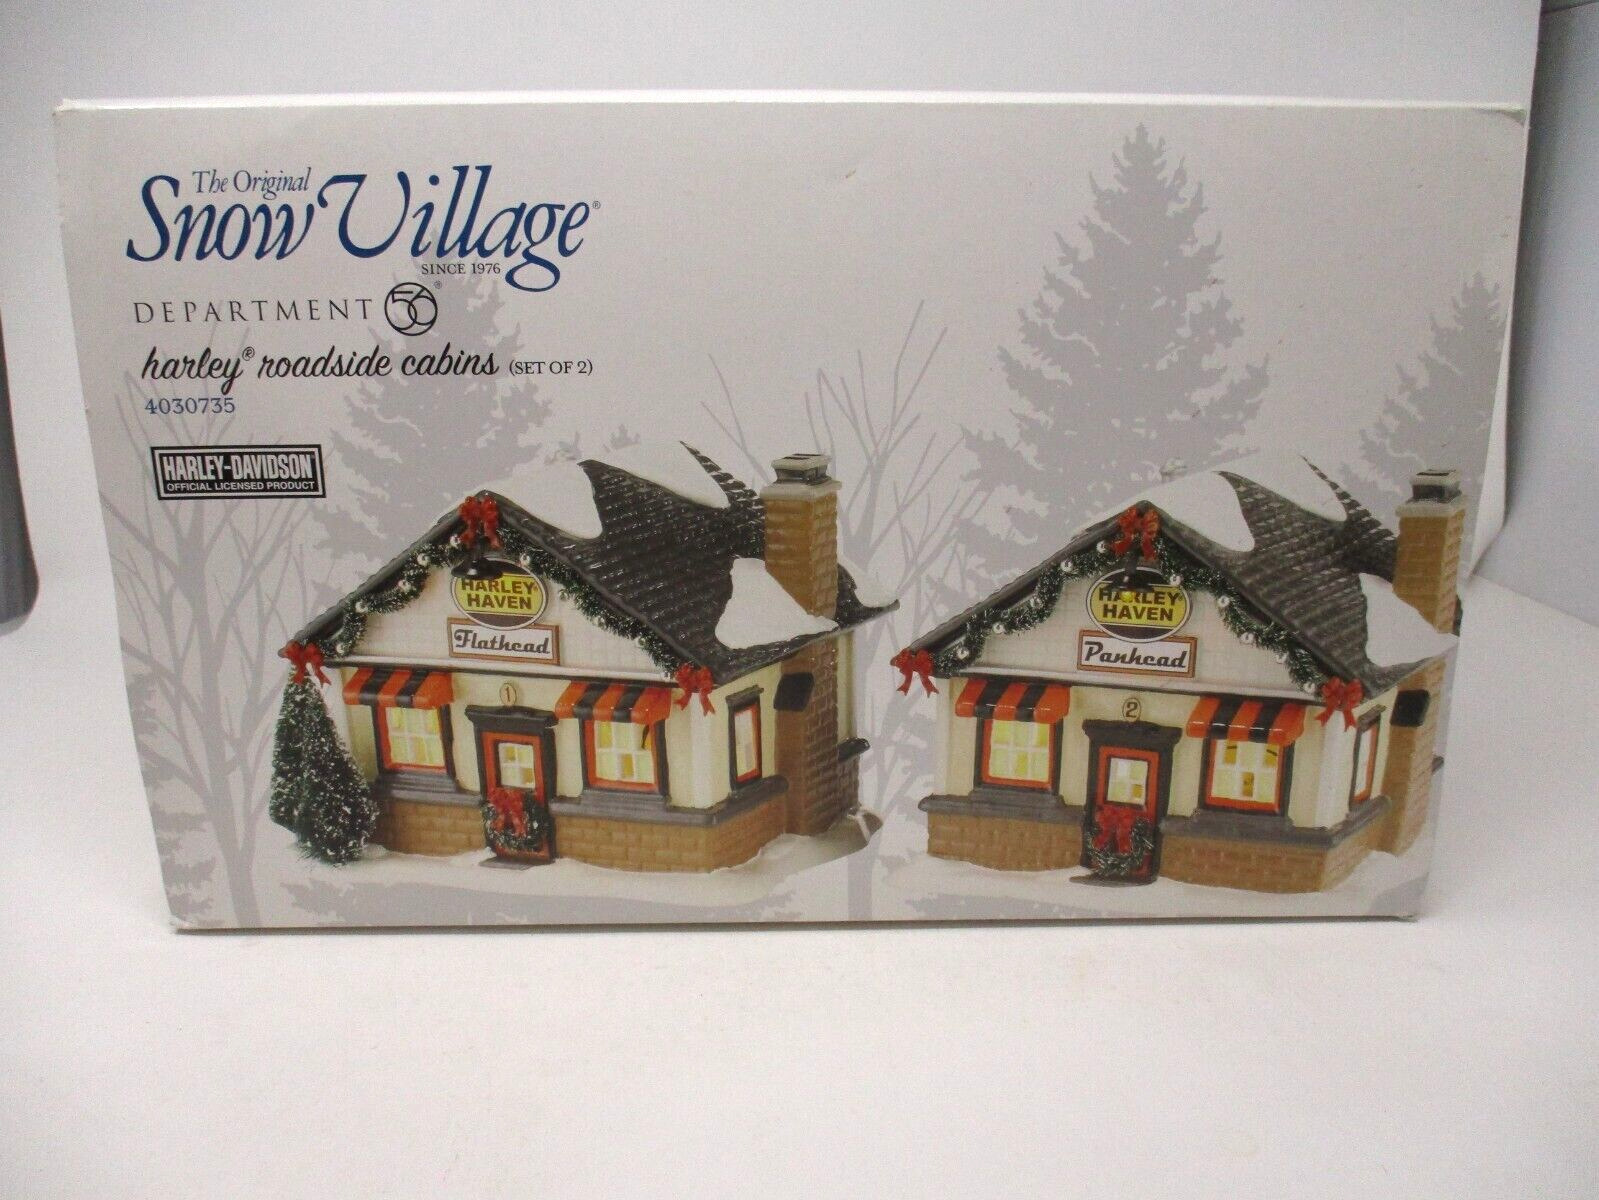 Dept 56 Snow Village Harley Roadside Cabins New In Box Christmas 4030735